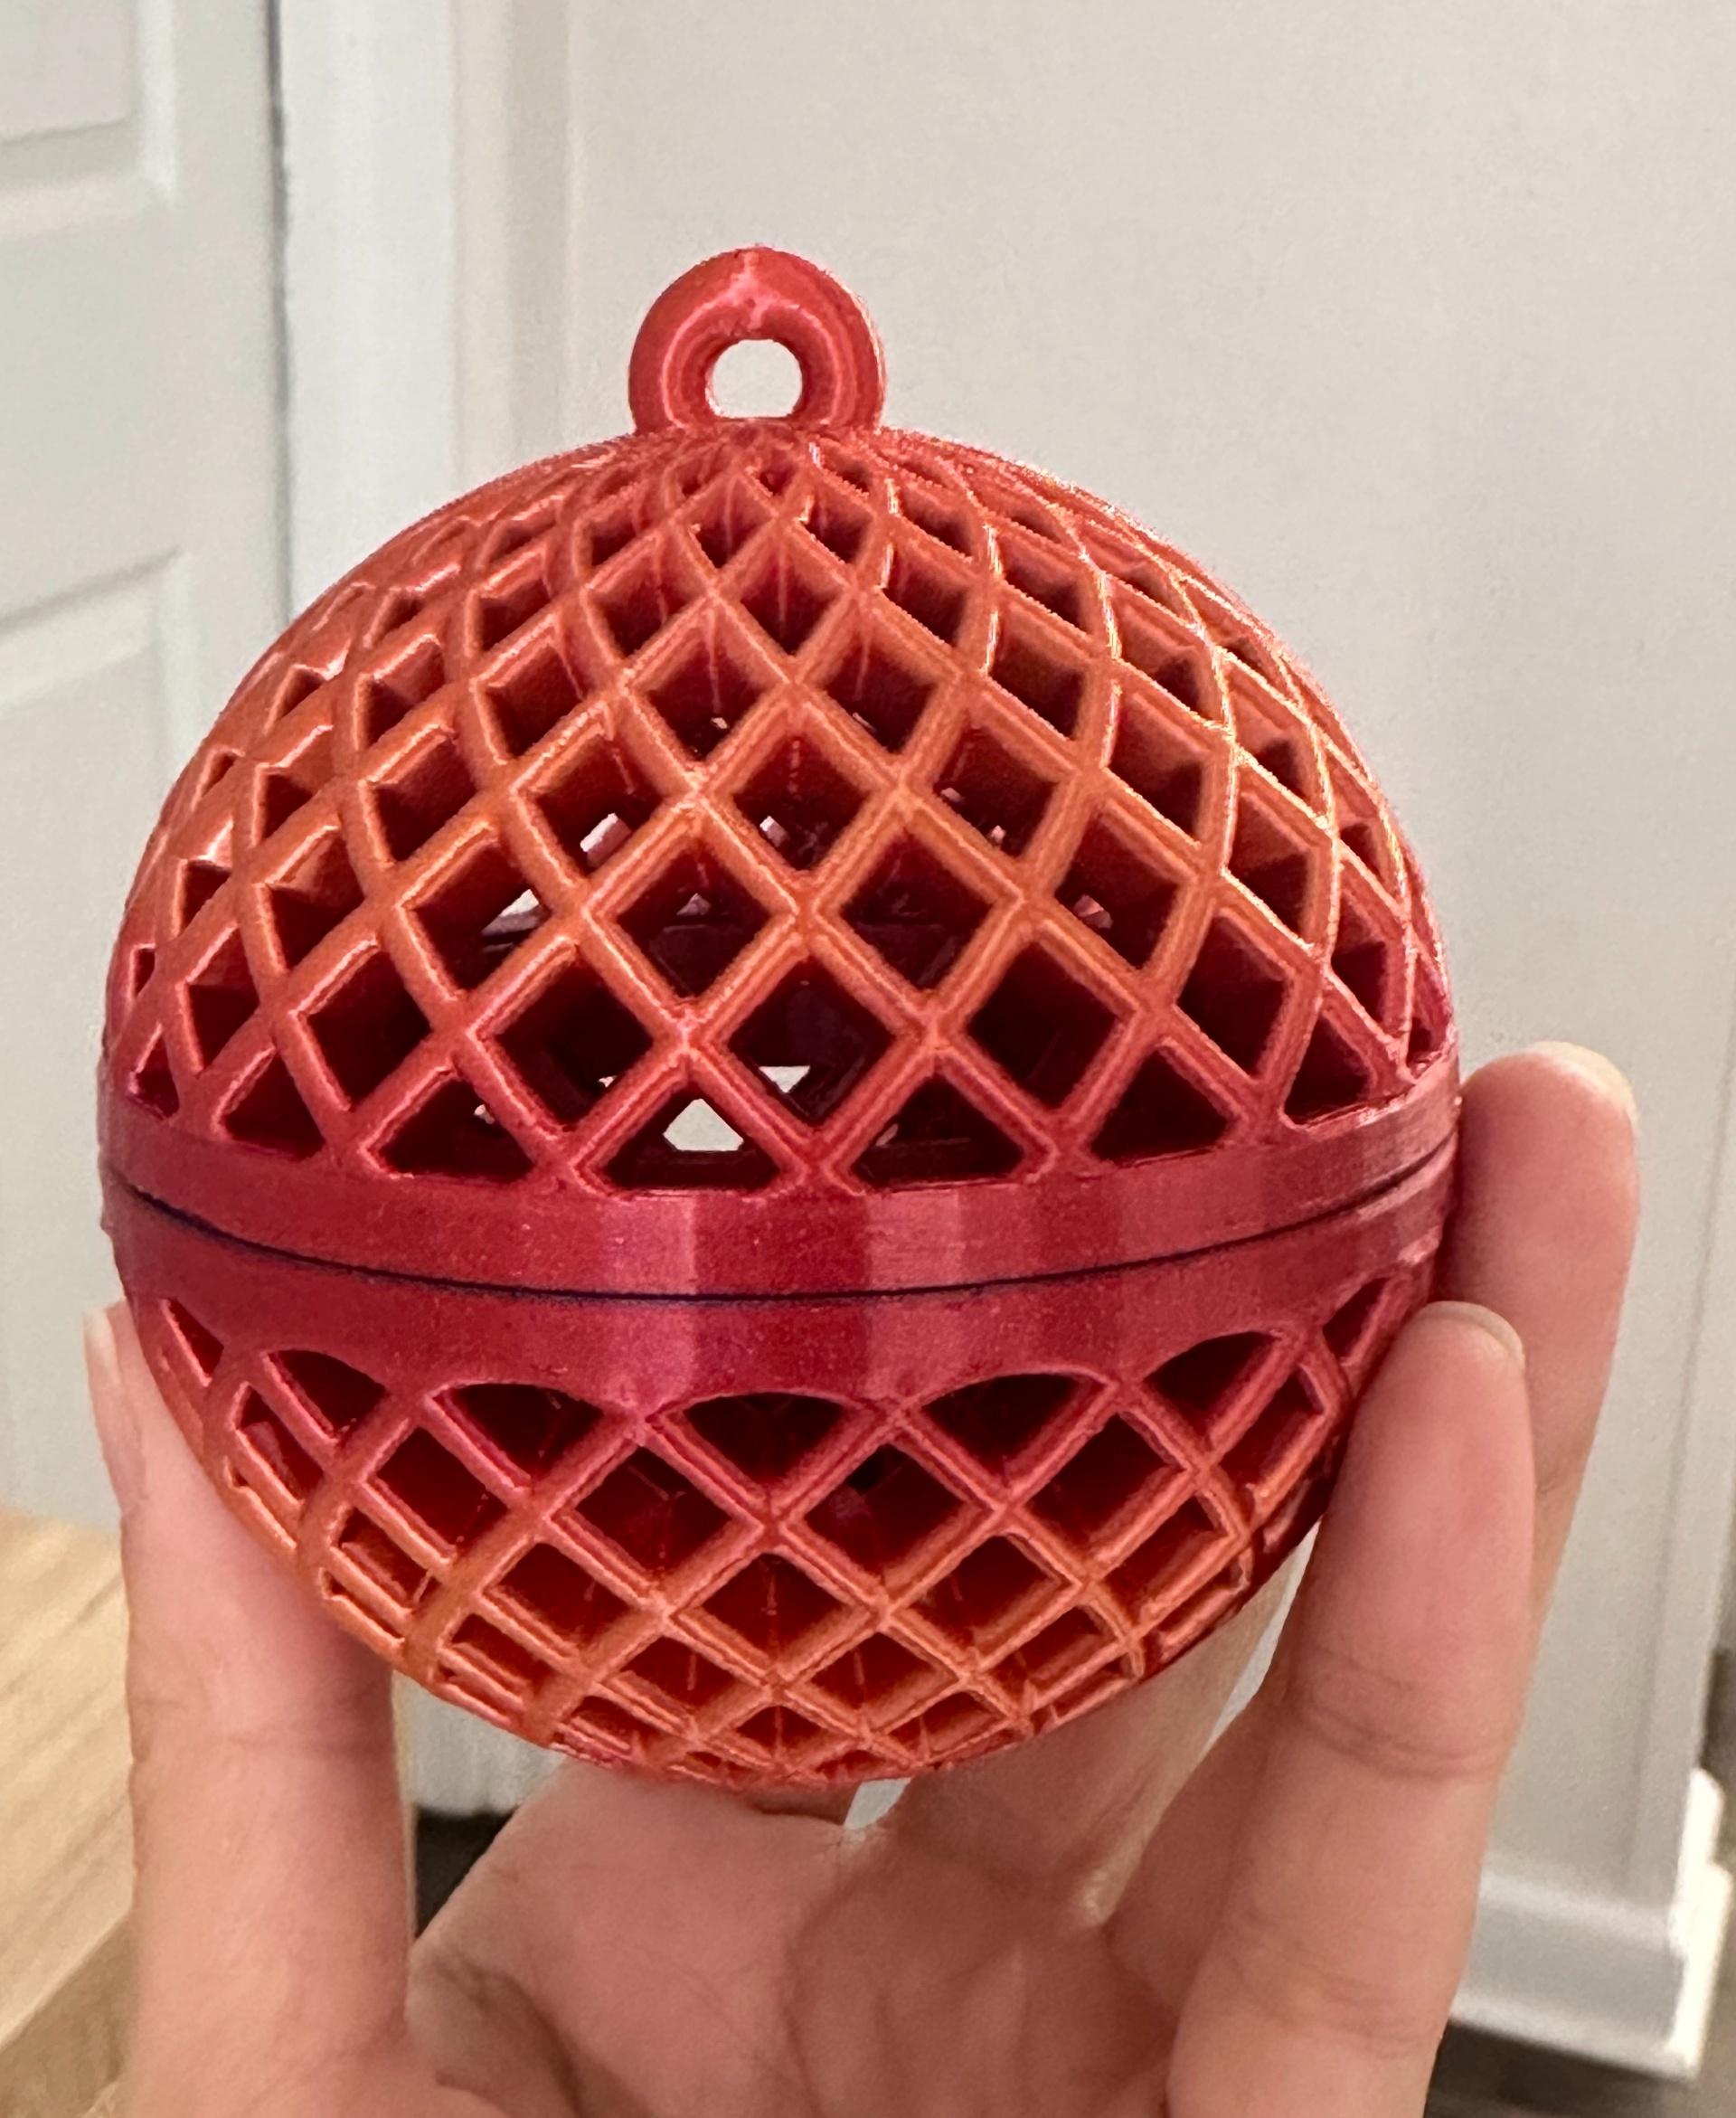 Diamond Ornament Container (Open) - 13 hour print! it closes nicely on itself, I used up some blue filament that was ending at the beginning, which is why there's such a harsh line at the seam - 3d model